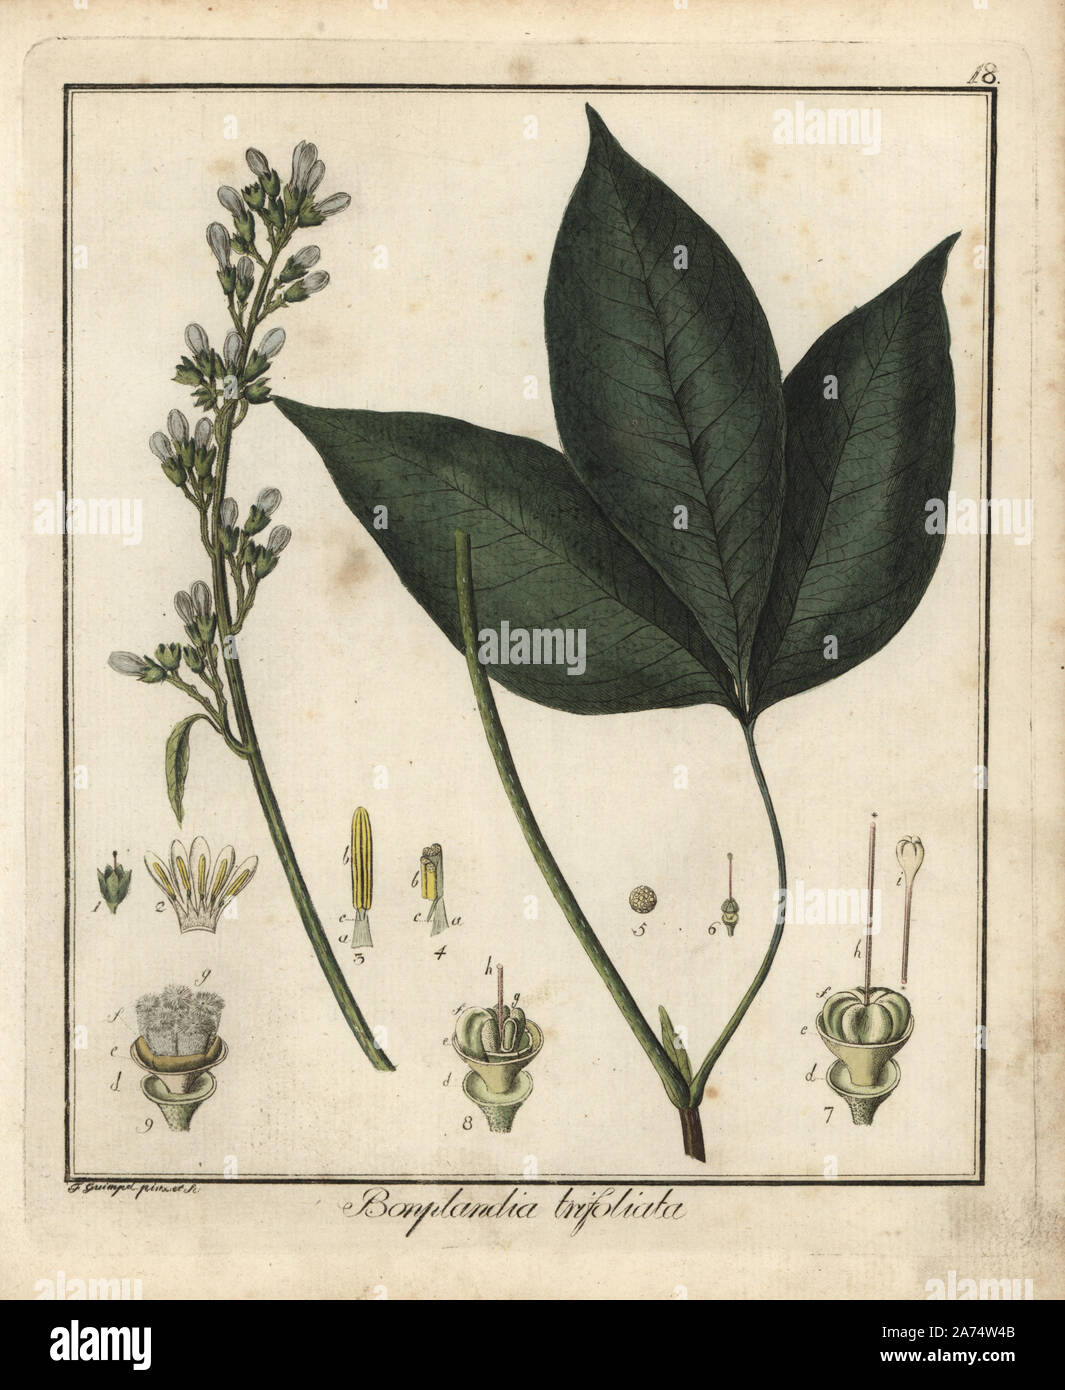 Angostura trifoliata. Handcoloured copperplate engraving by F. Guimpel from his own botanical illustration in Dr. Friedrich Gottlob Hayne's Medical Botany, Berlin, 1822. Hayne (1763-1832) was a German botanist, apothecary and professor of pharmaceutical botany at Berlin University. Stock Photo